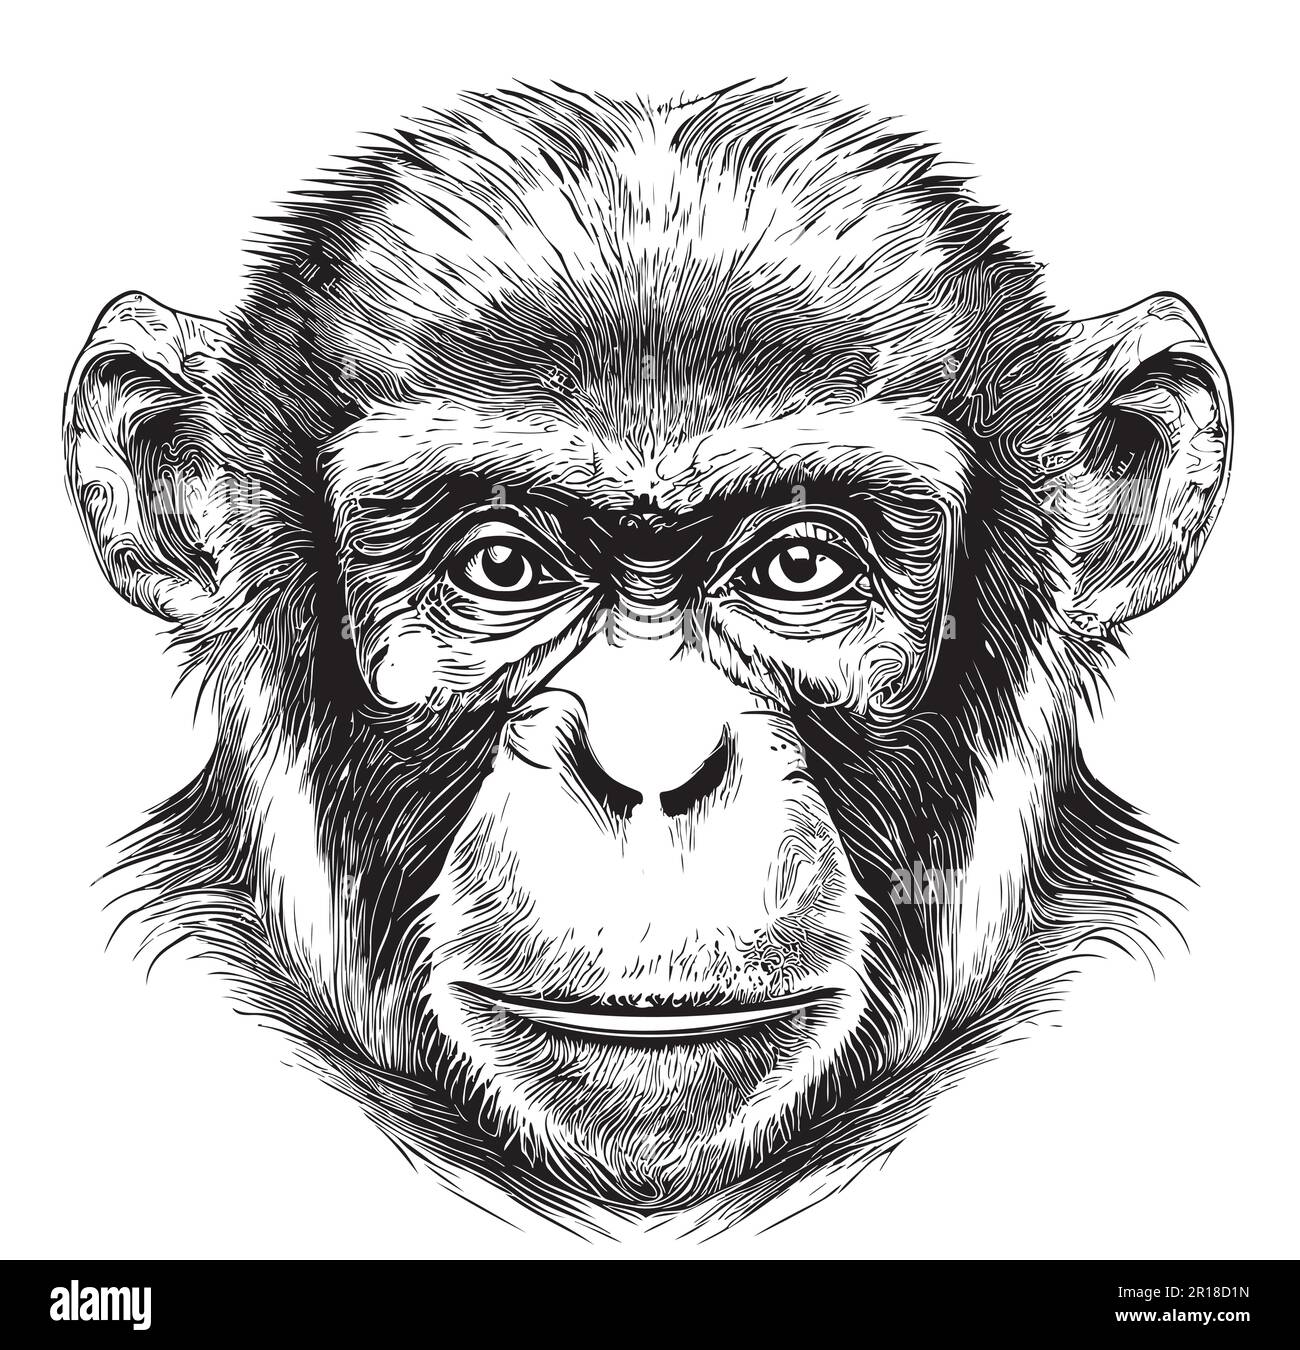 Monkey face sketch hand drawn in doodle style illustration Stock Vector